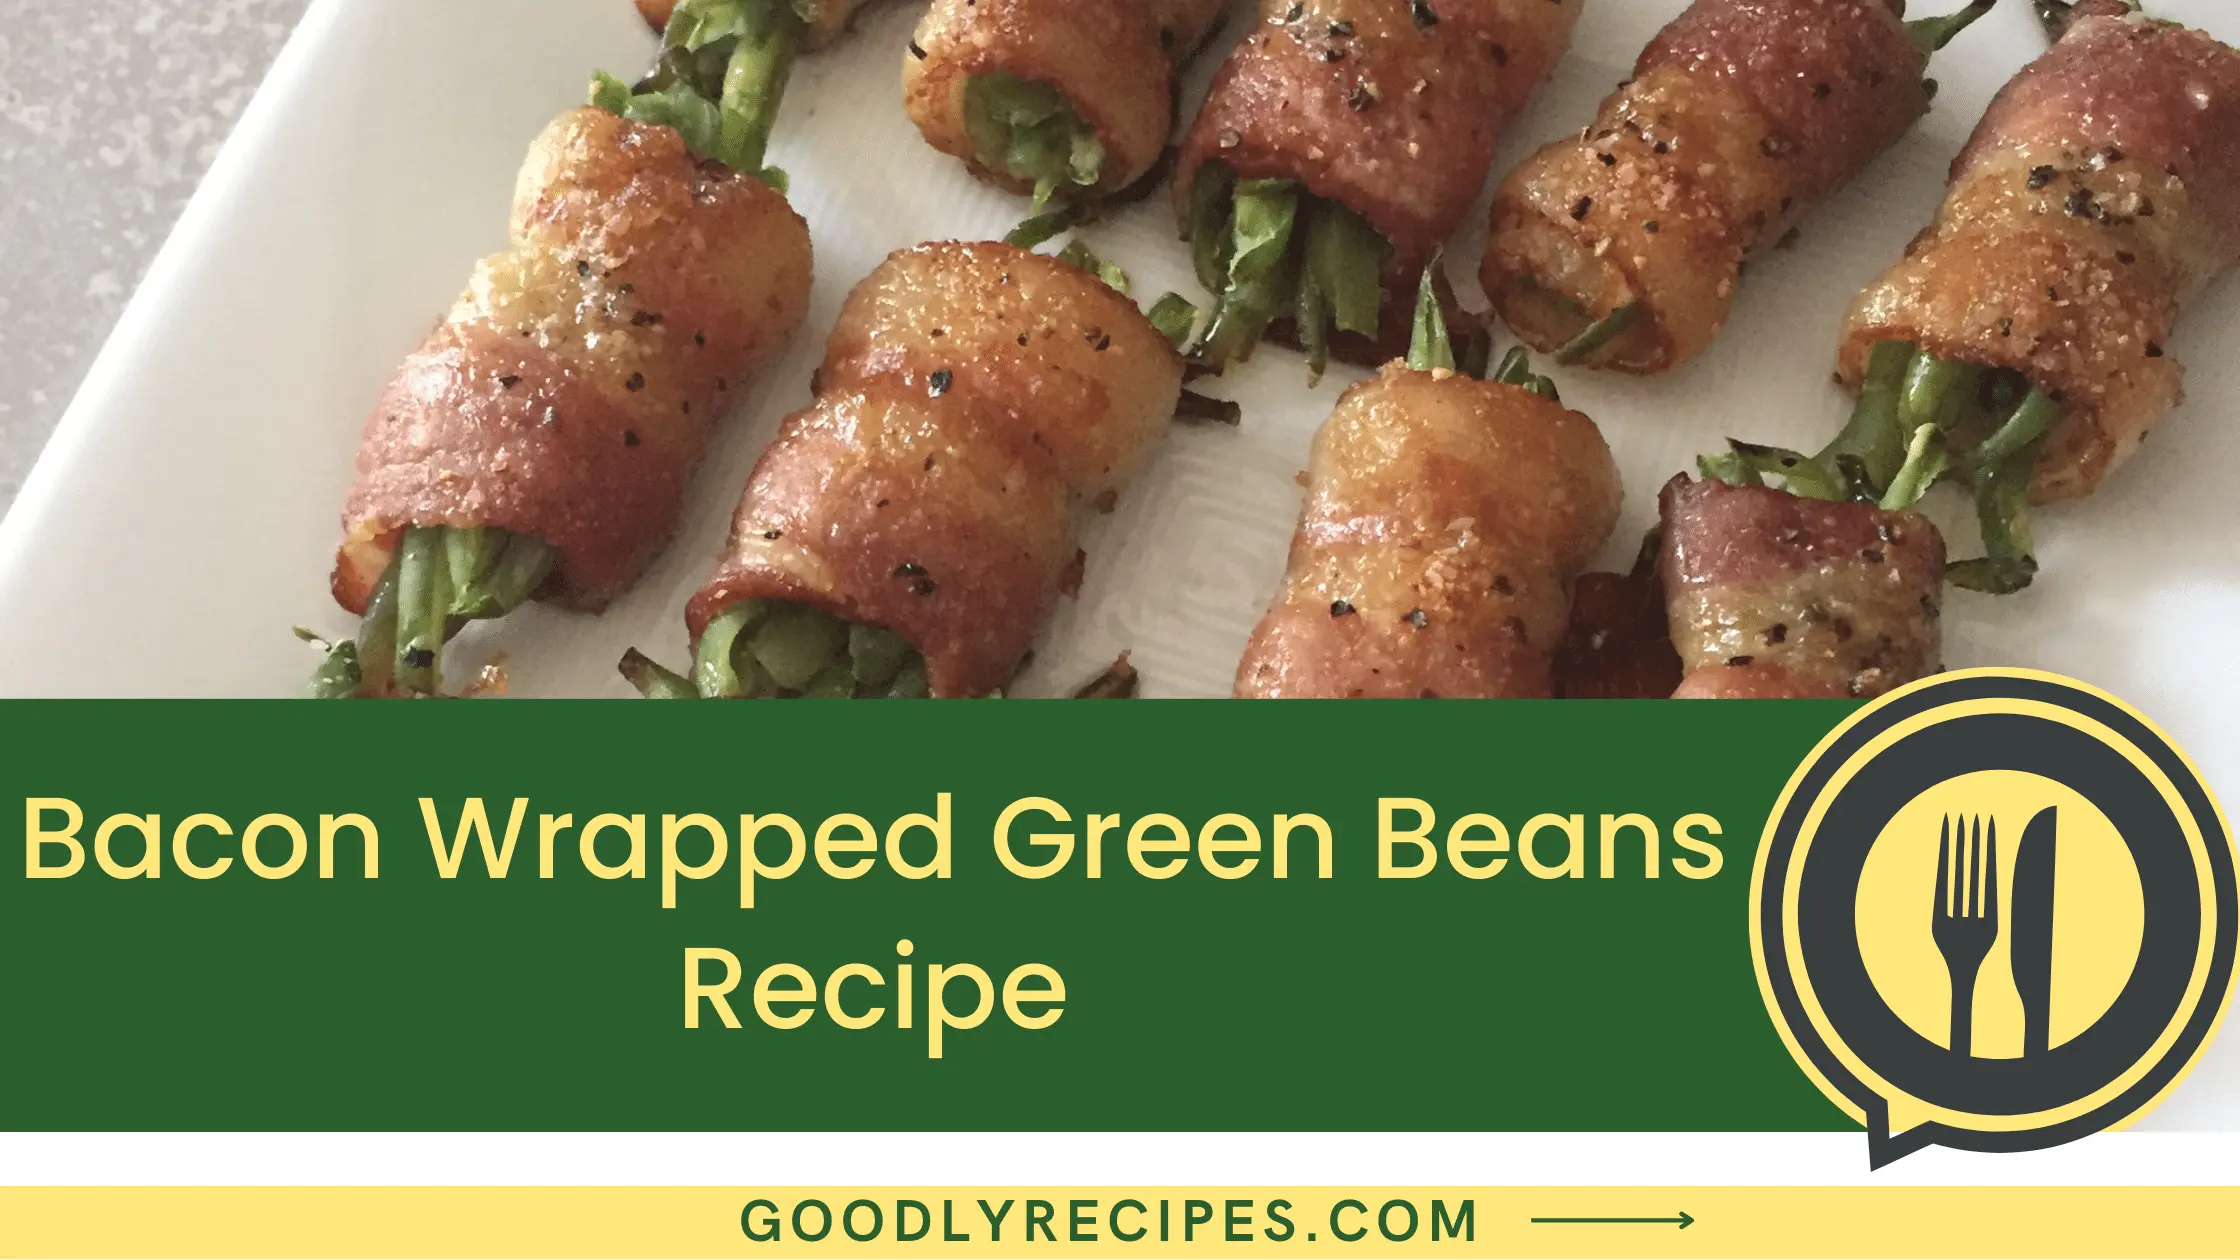 Bacon Wrapped Green Beans Recipe - For Food Lovers